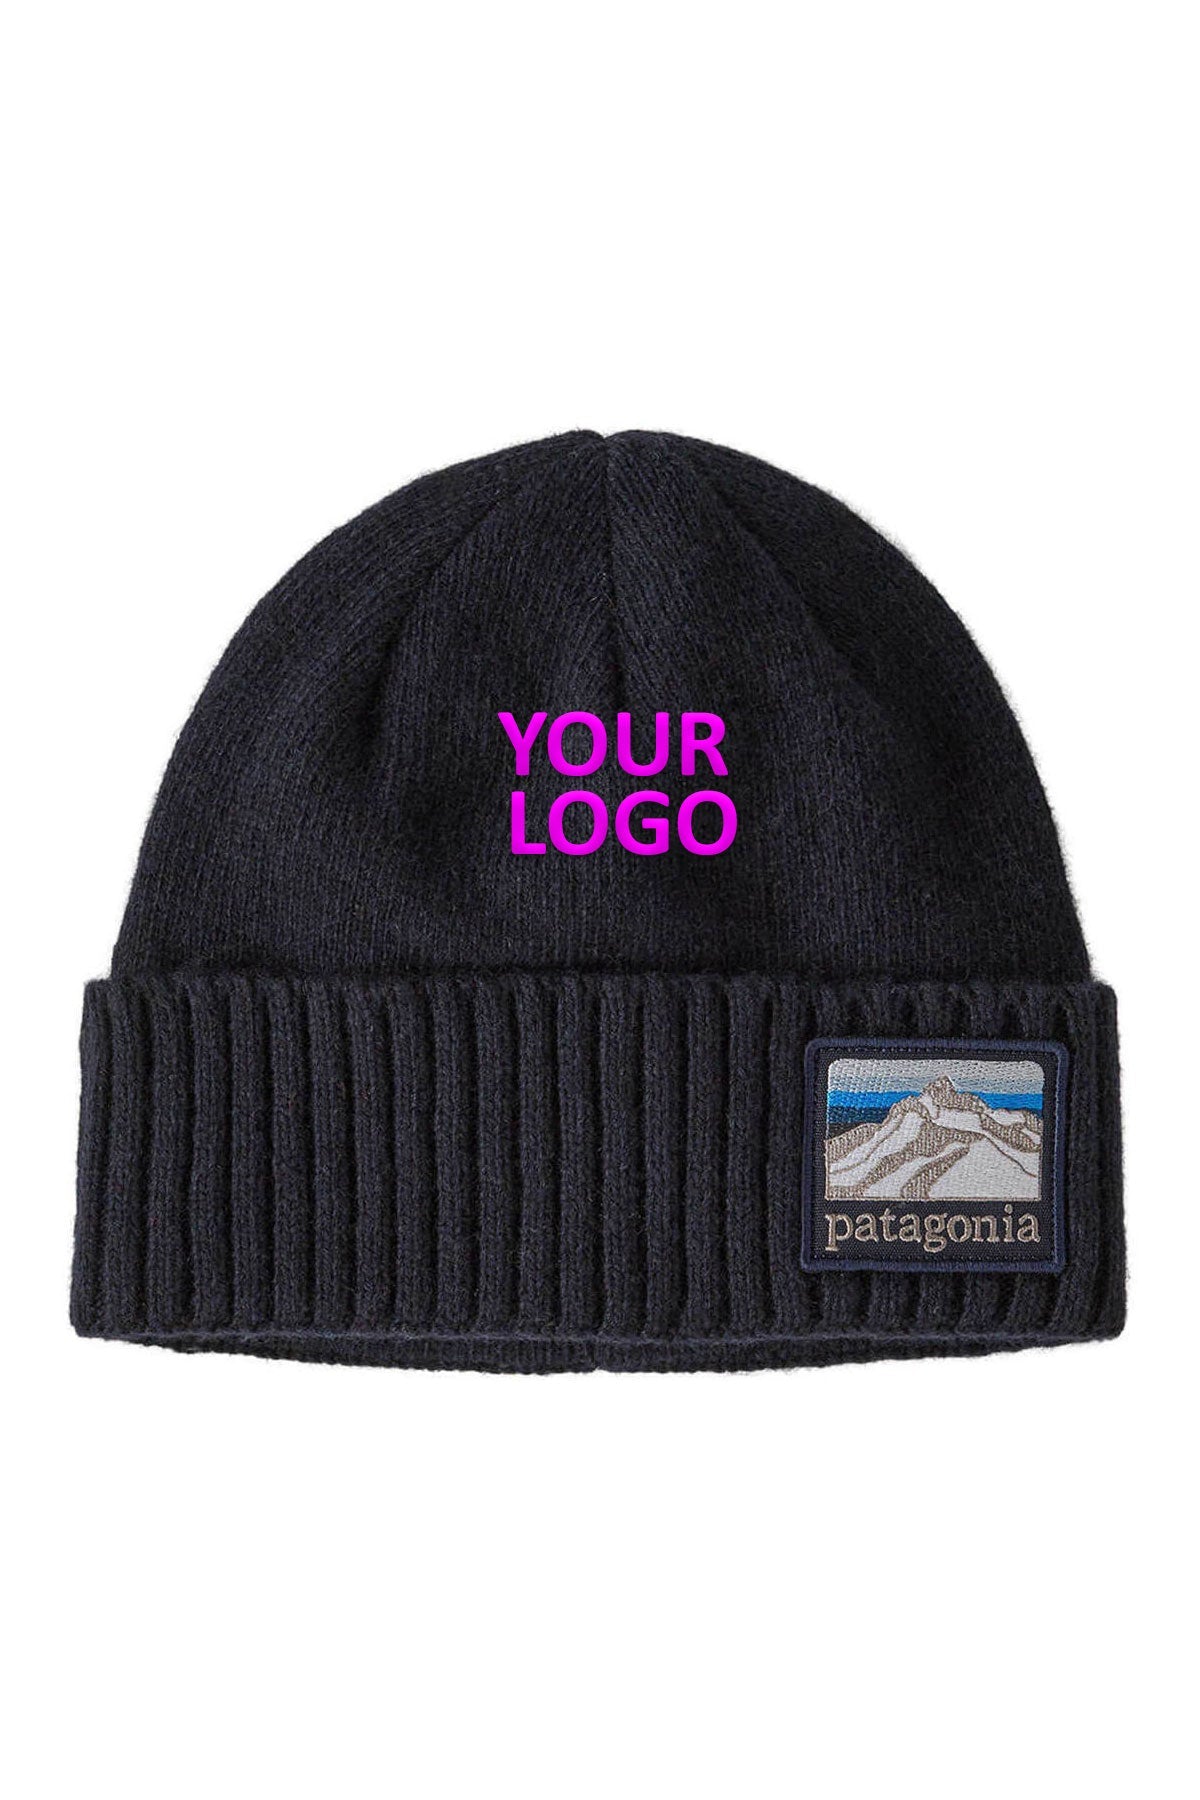 Patagonia Brodeo Branded Beanies, Classic Navy